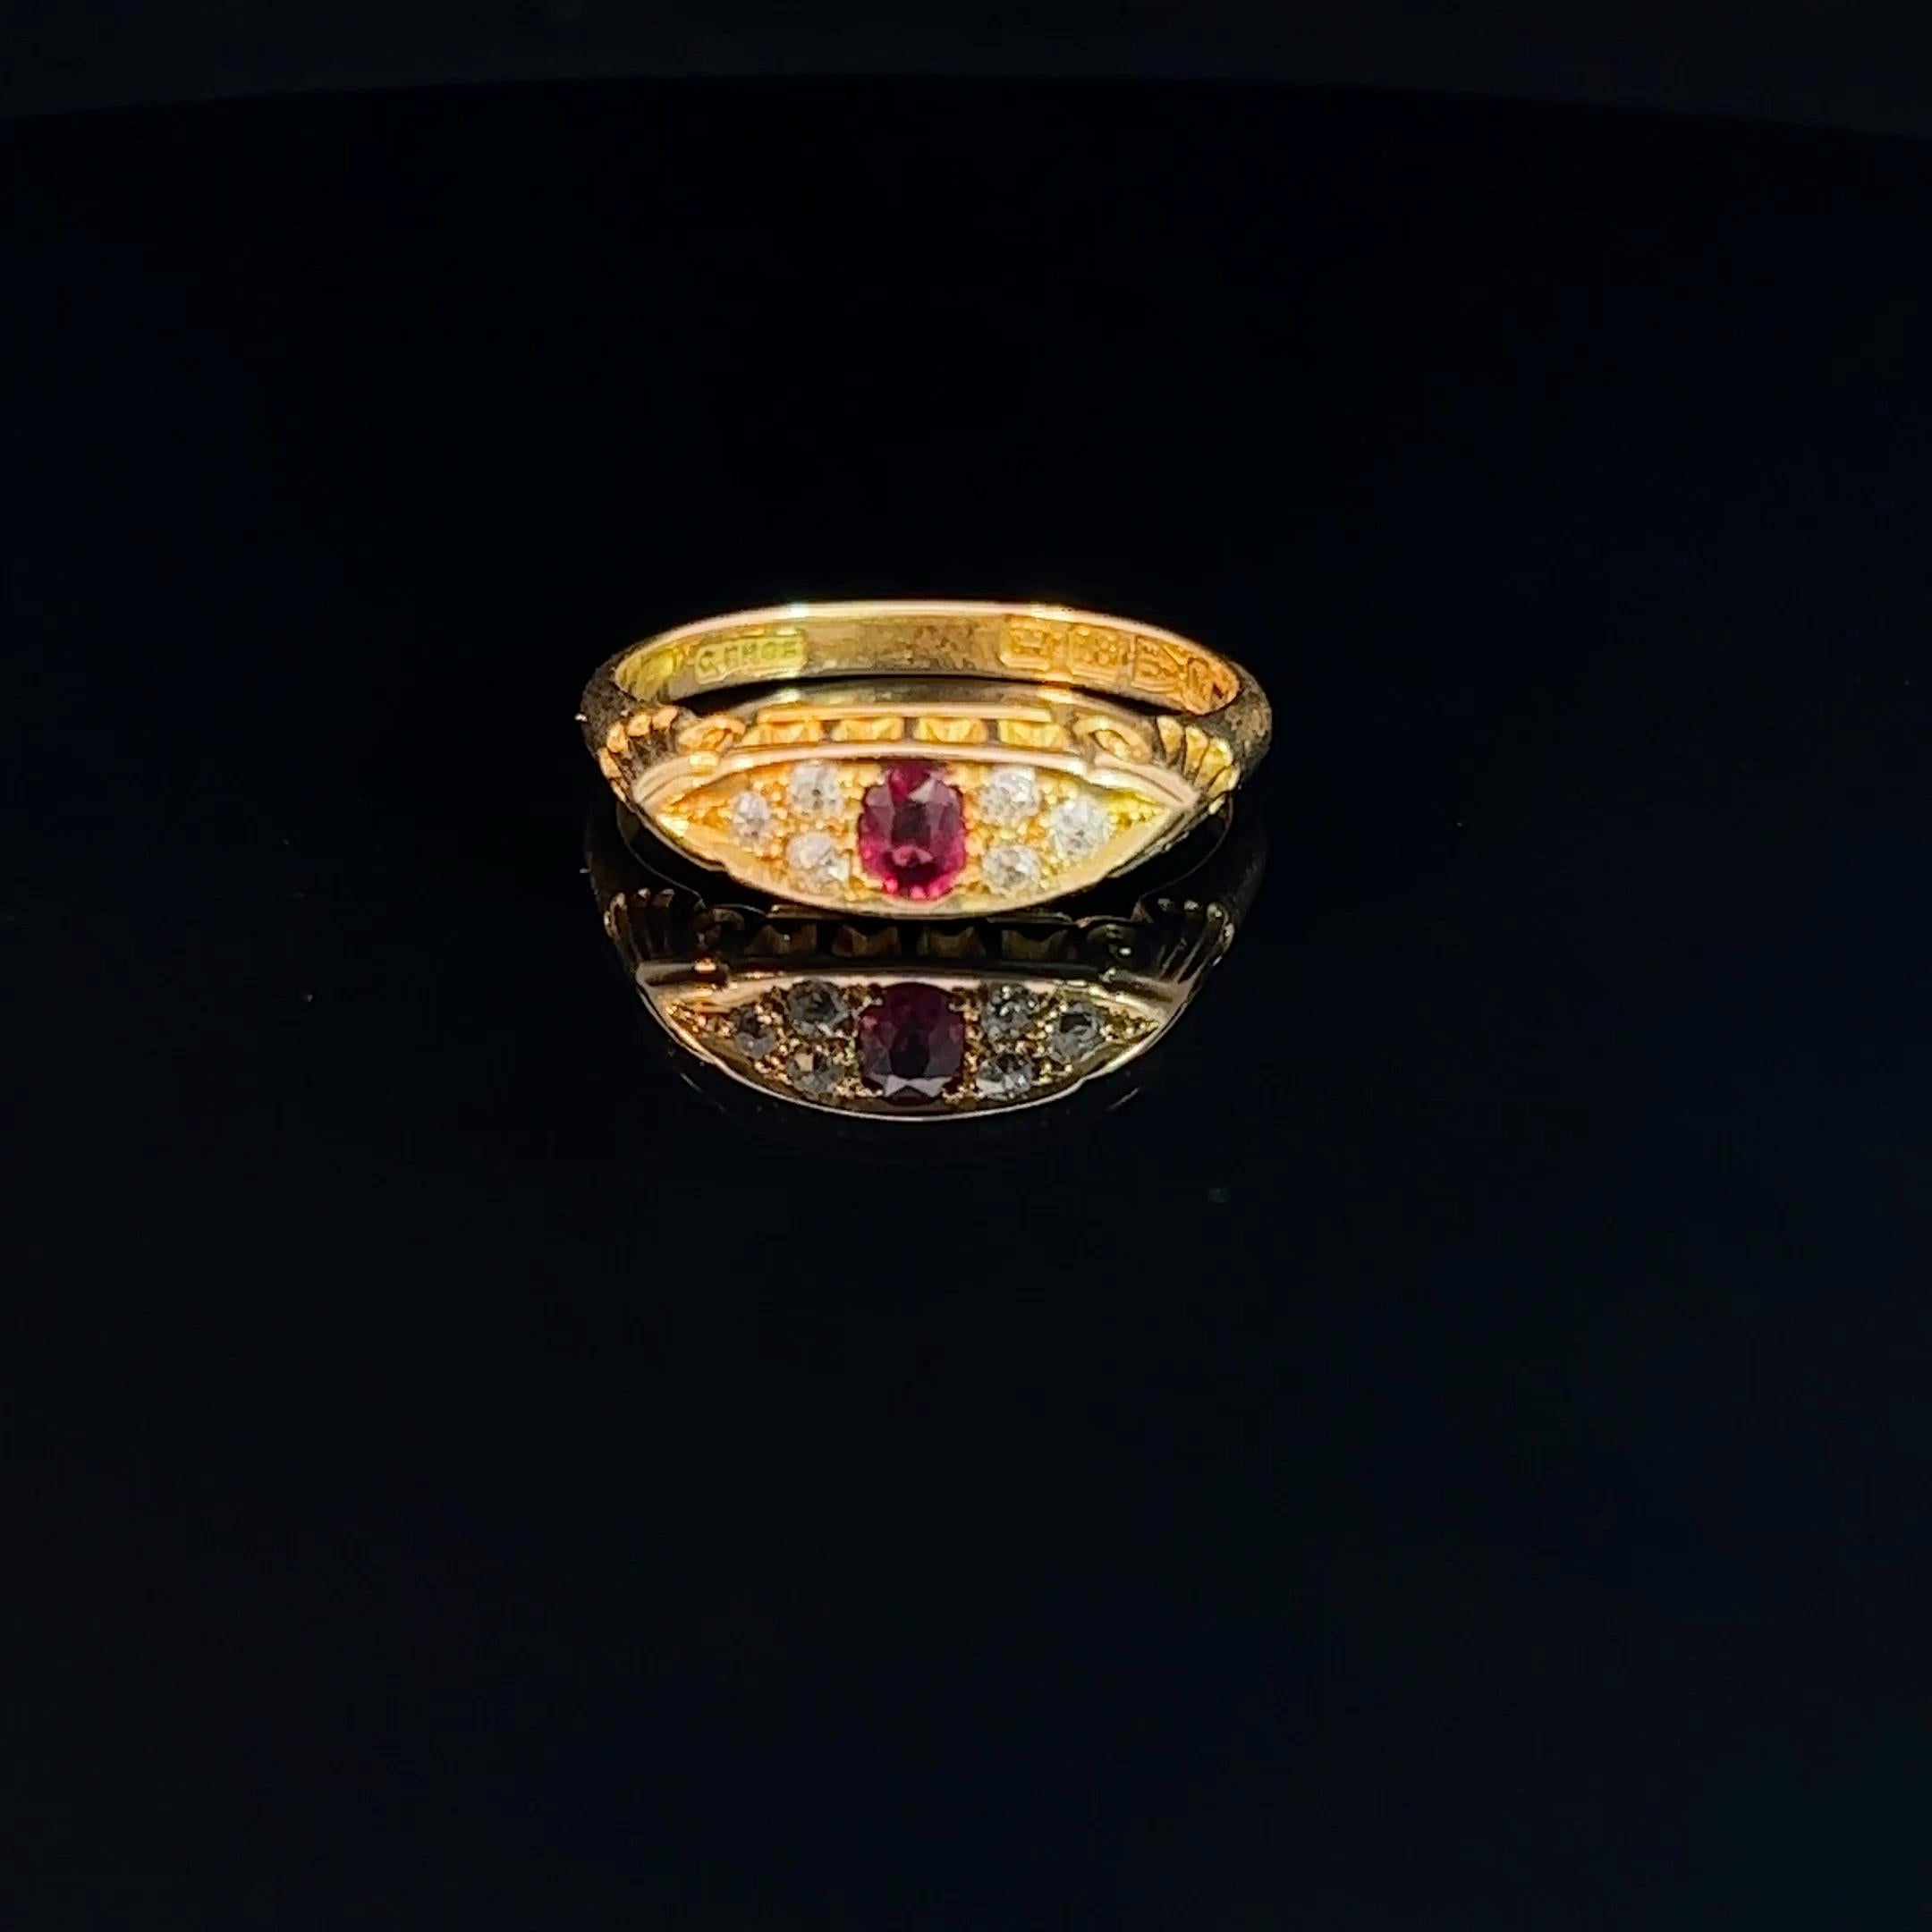 Mixed Cut Victorian Ruby and Diamond Ring  - Hallmarked Chester 1895